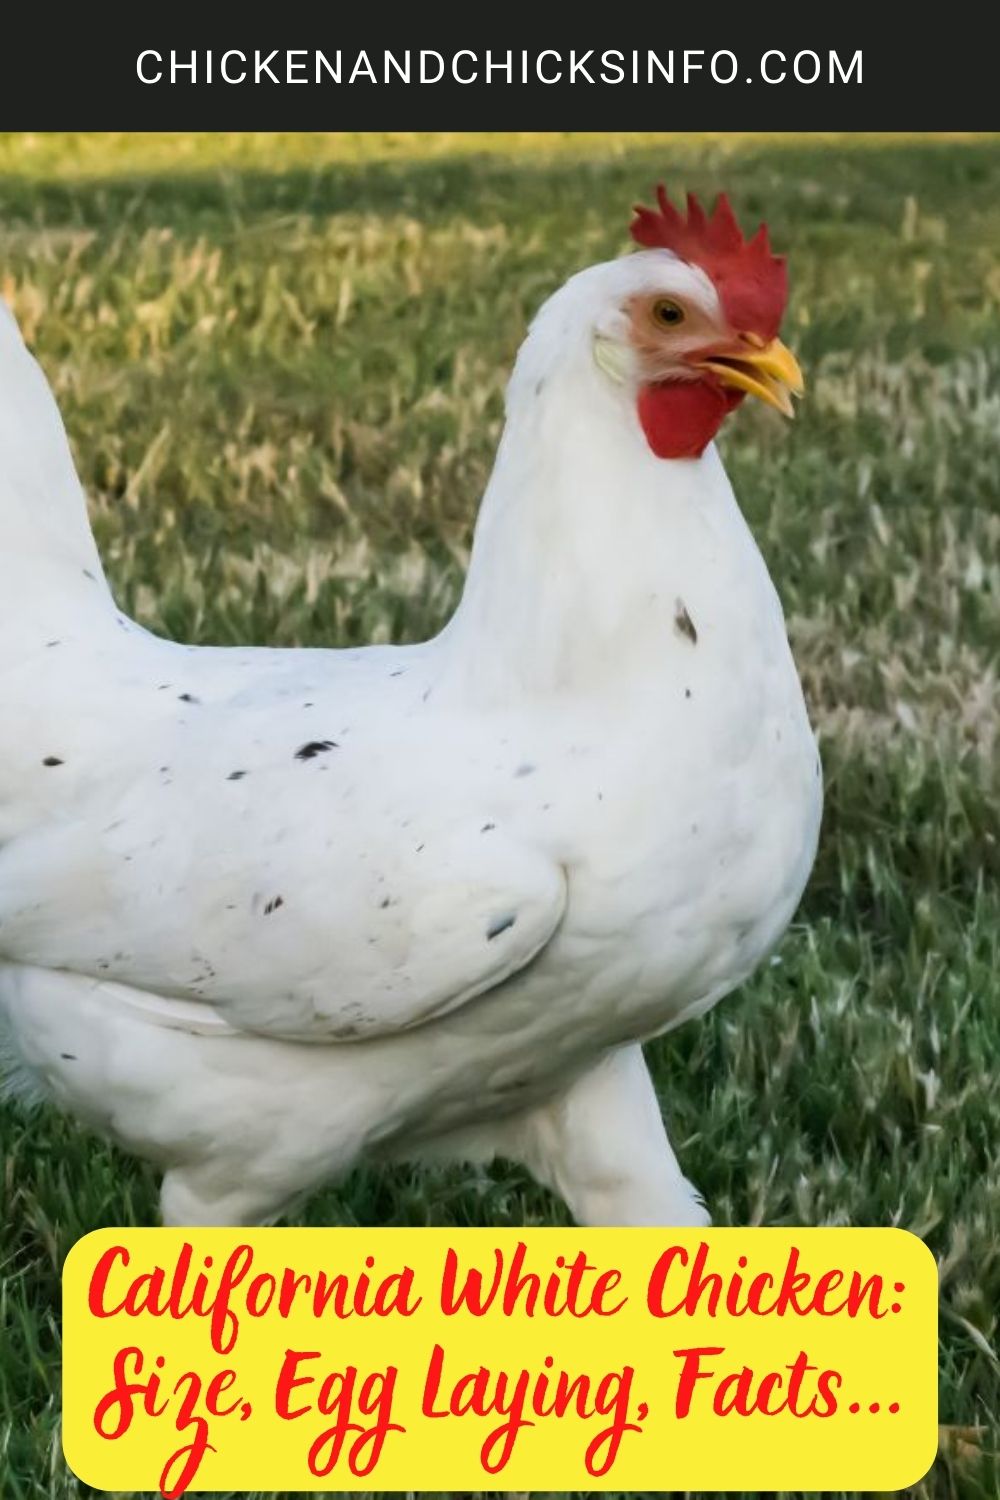 California White Chicken: Size, Egg Laying, Facts... poster.
